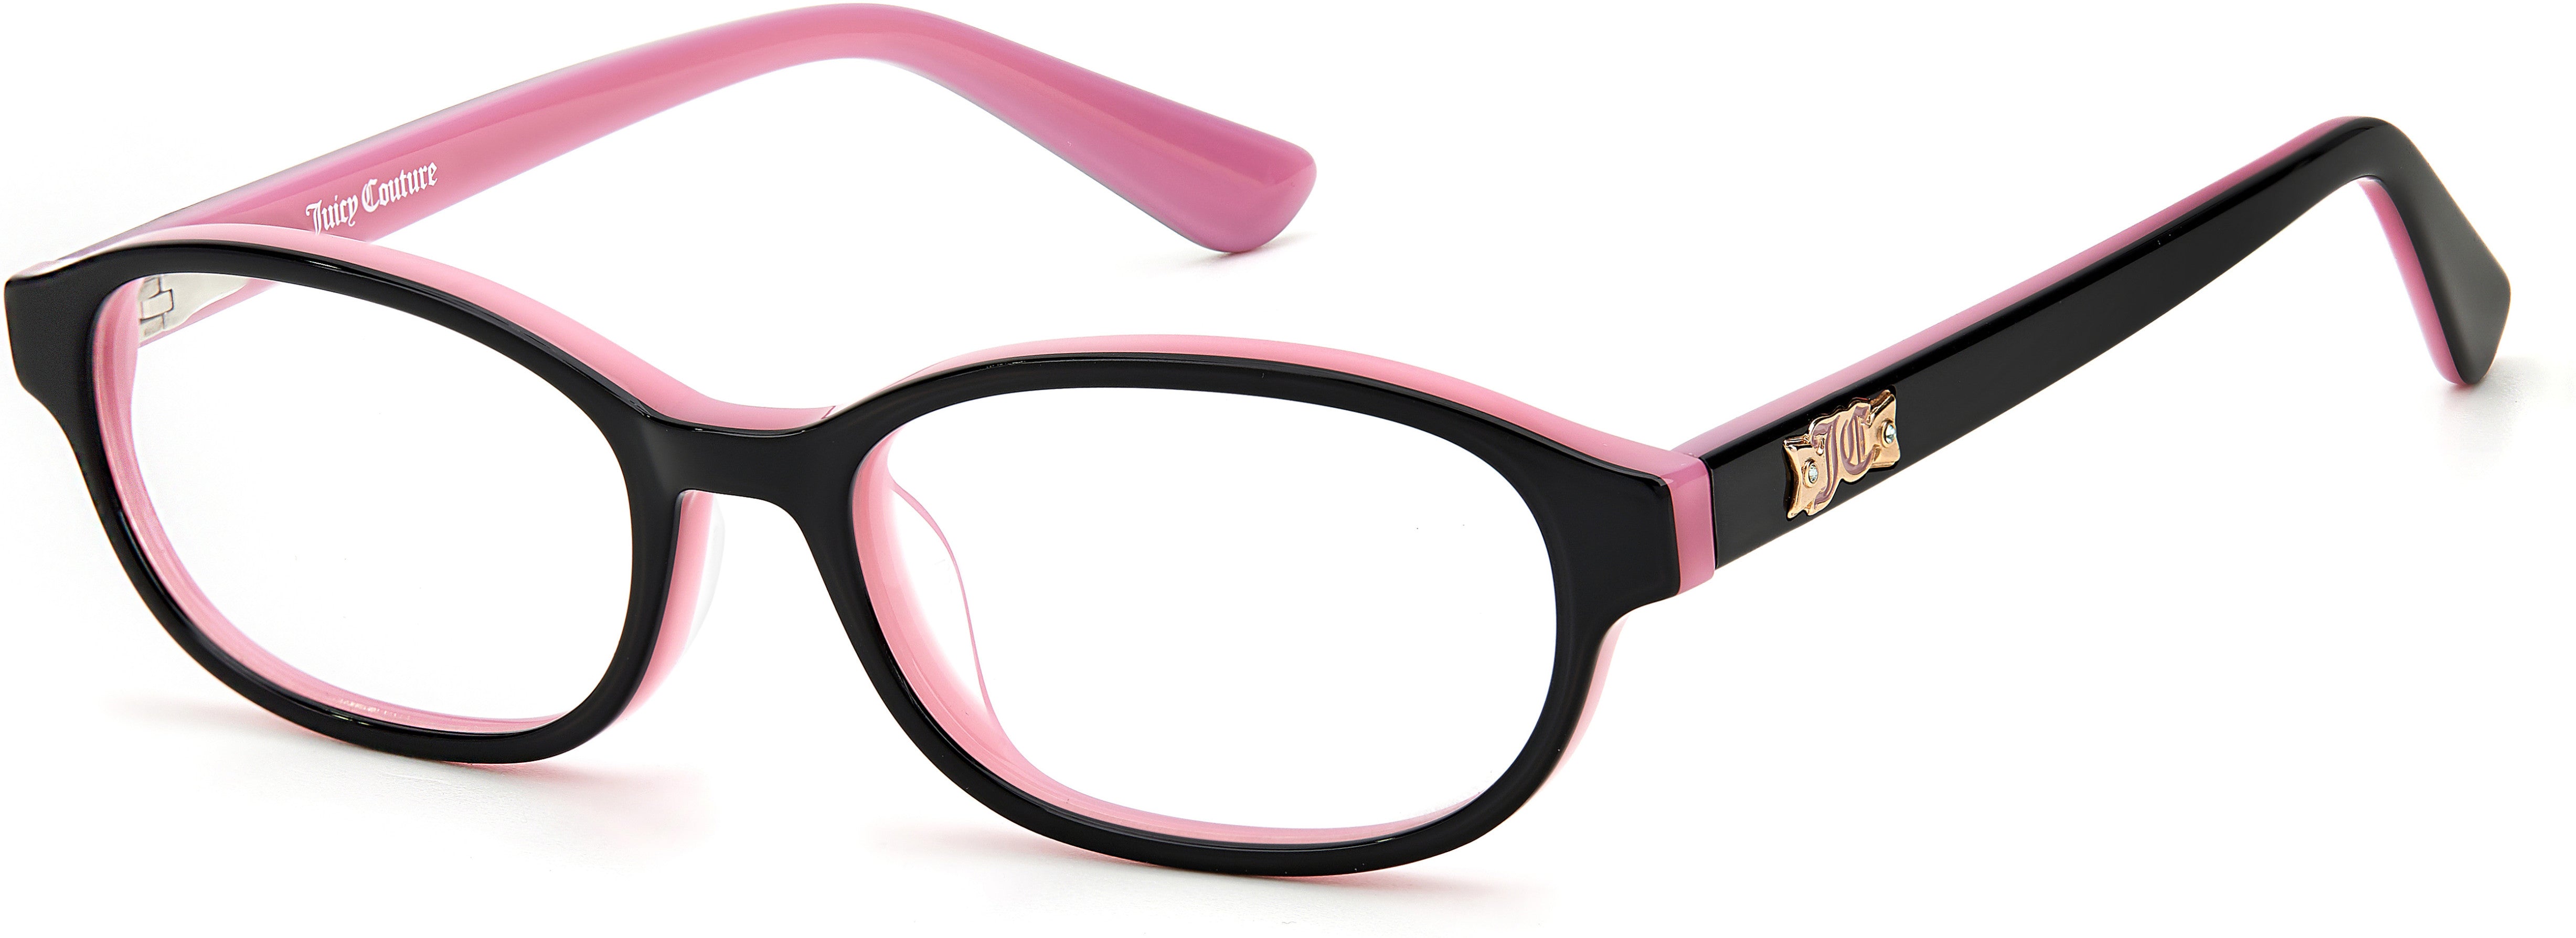 Juicy Couture Juicy 943 Oval Modified Eyeglasses 03H2-03H2  Black Pink (00 Demo Lens)